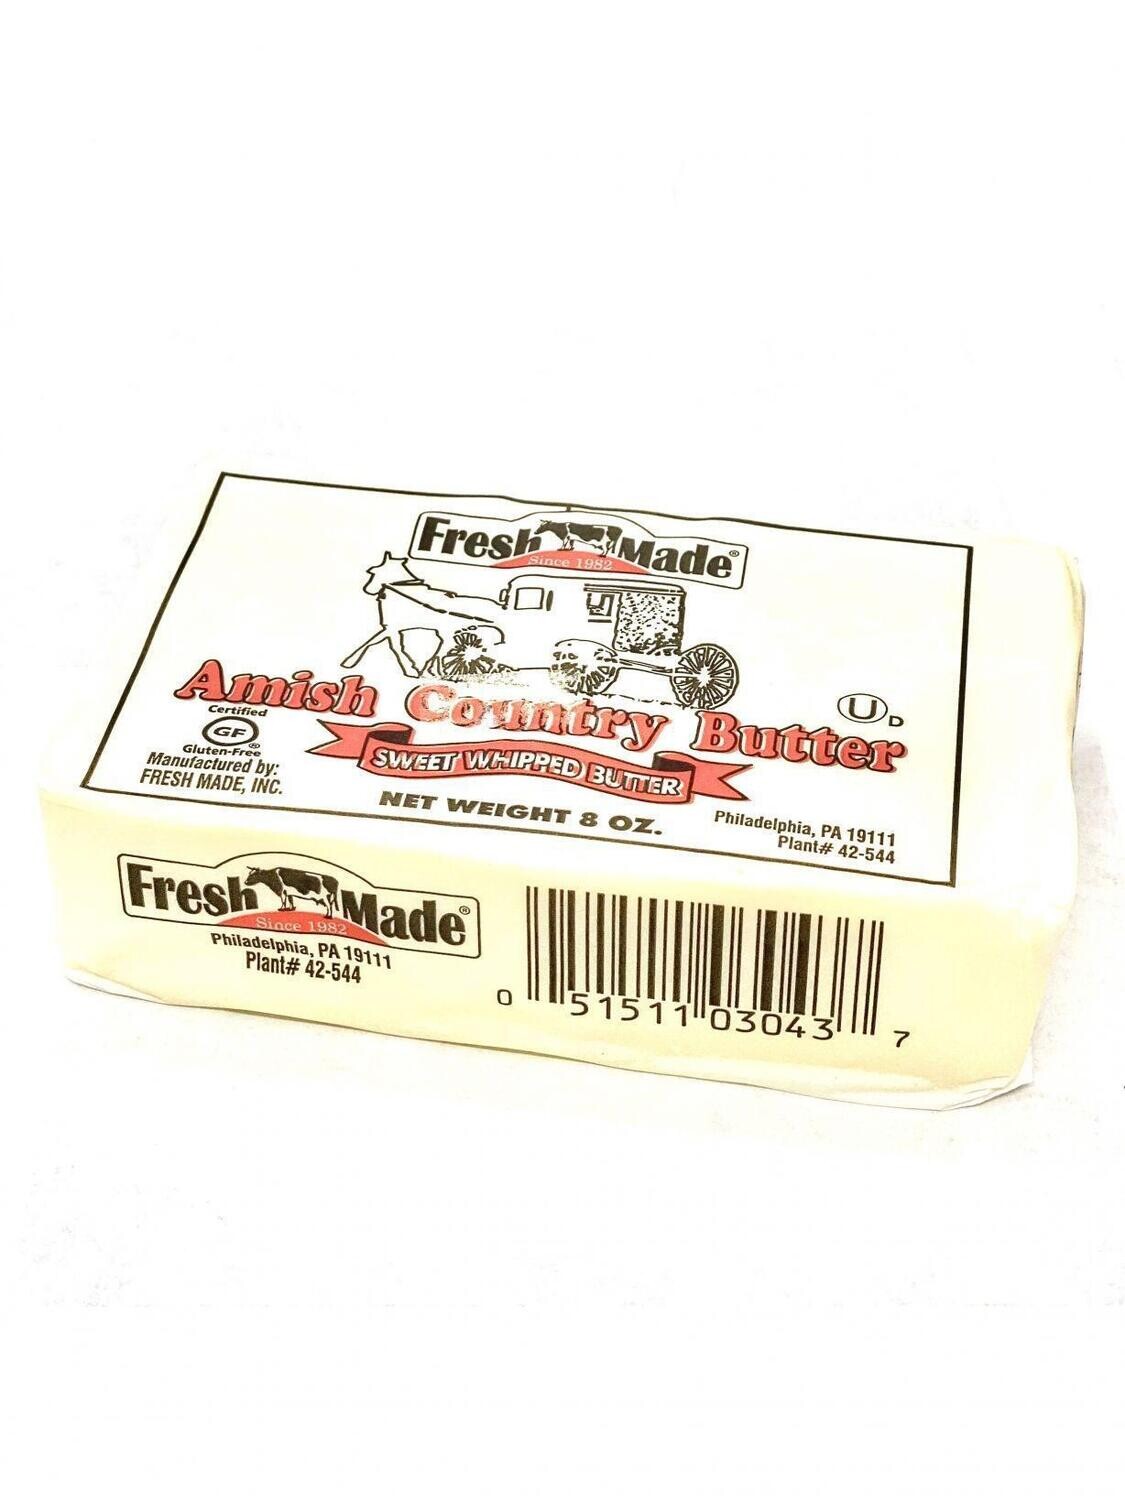 Fresh Made Amish Country Sweet Whipped Butter 8 oz (227g)